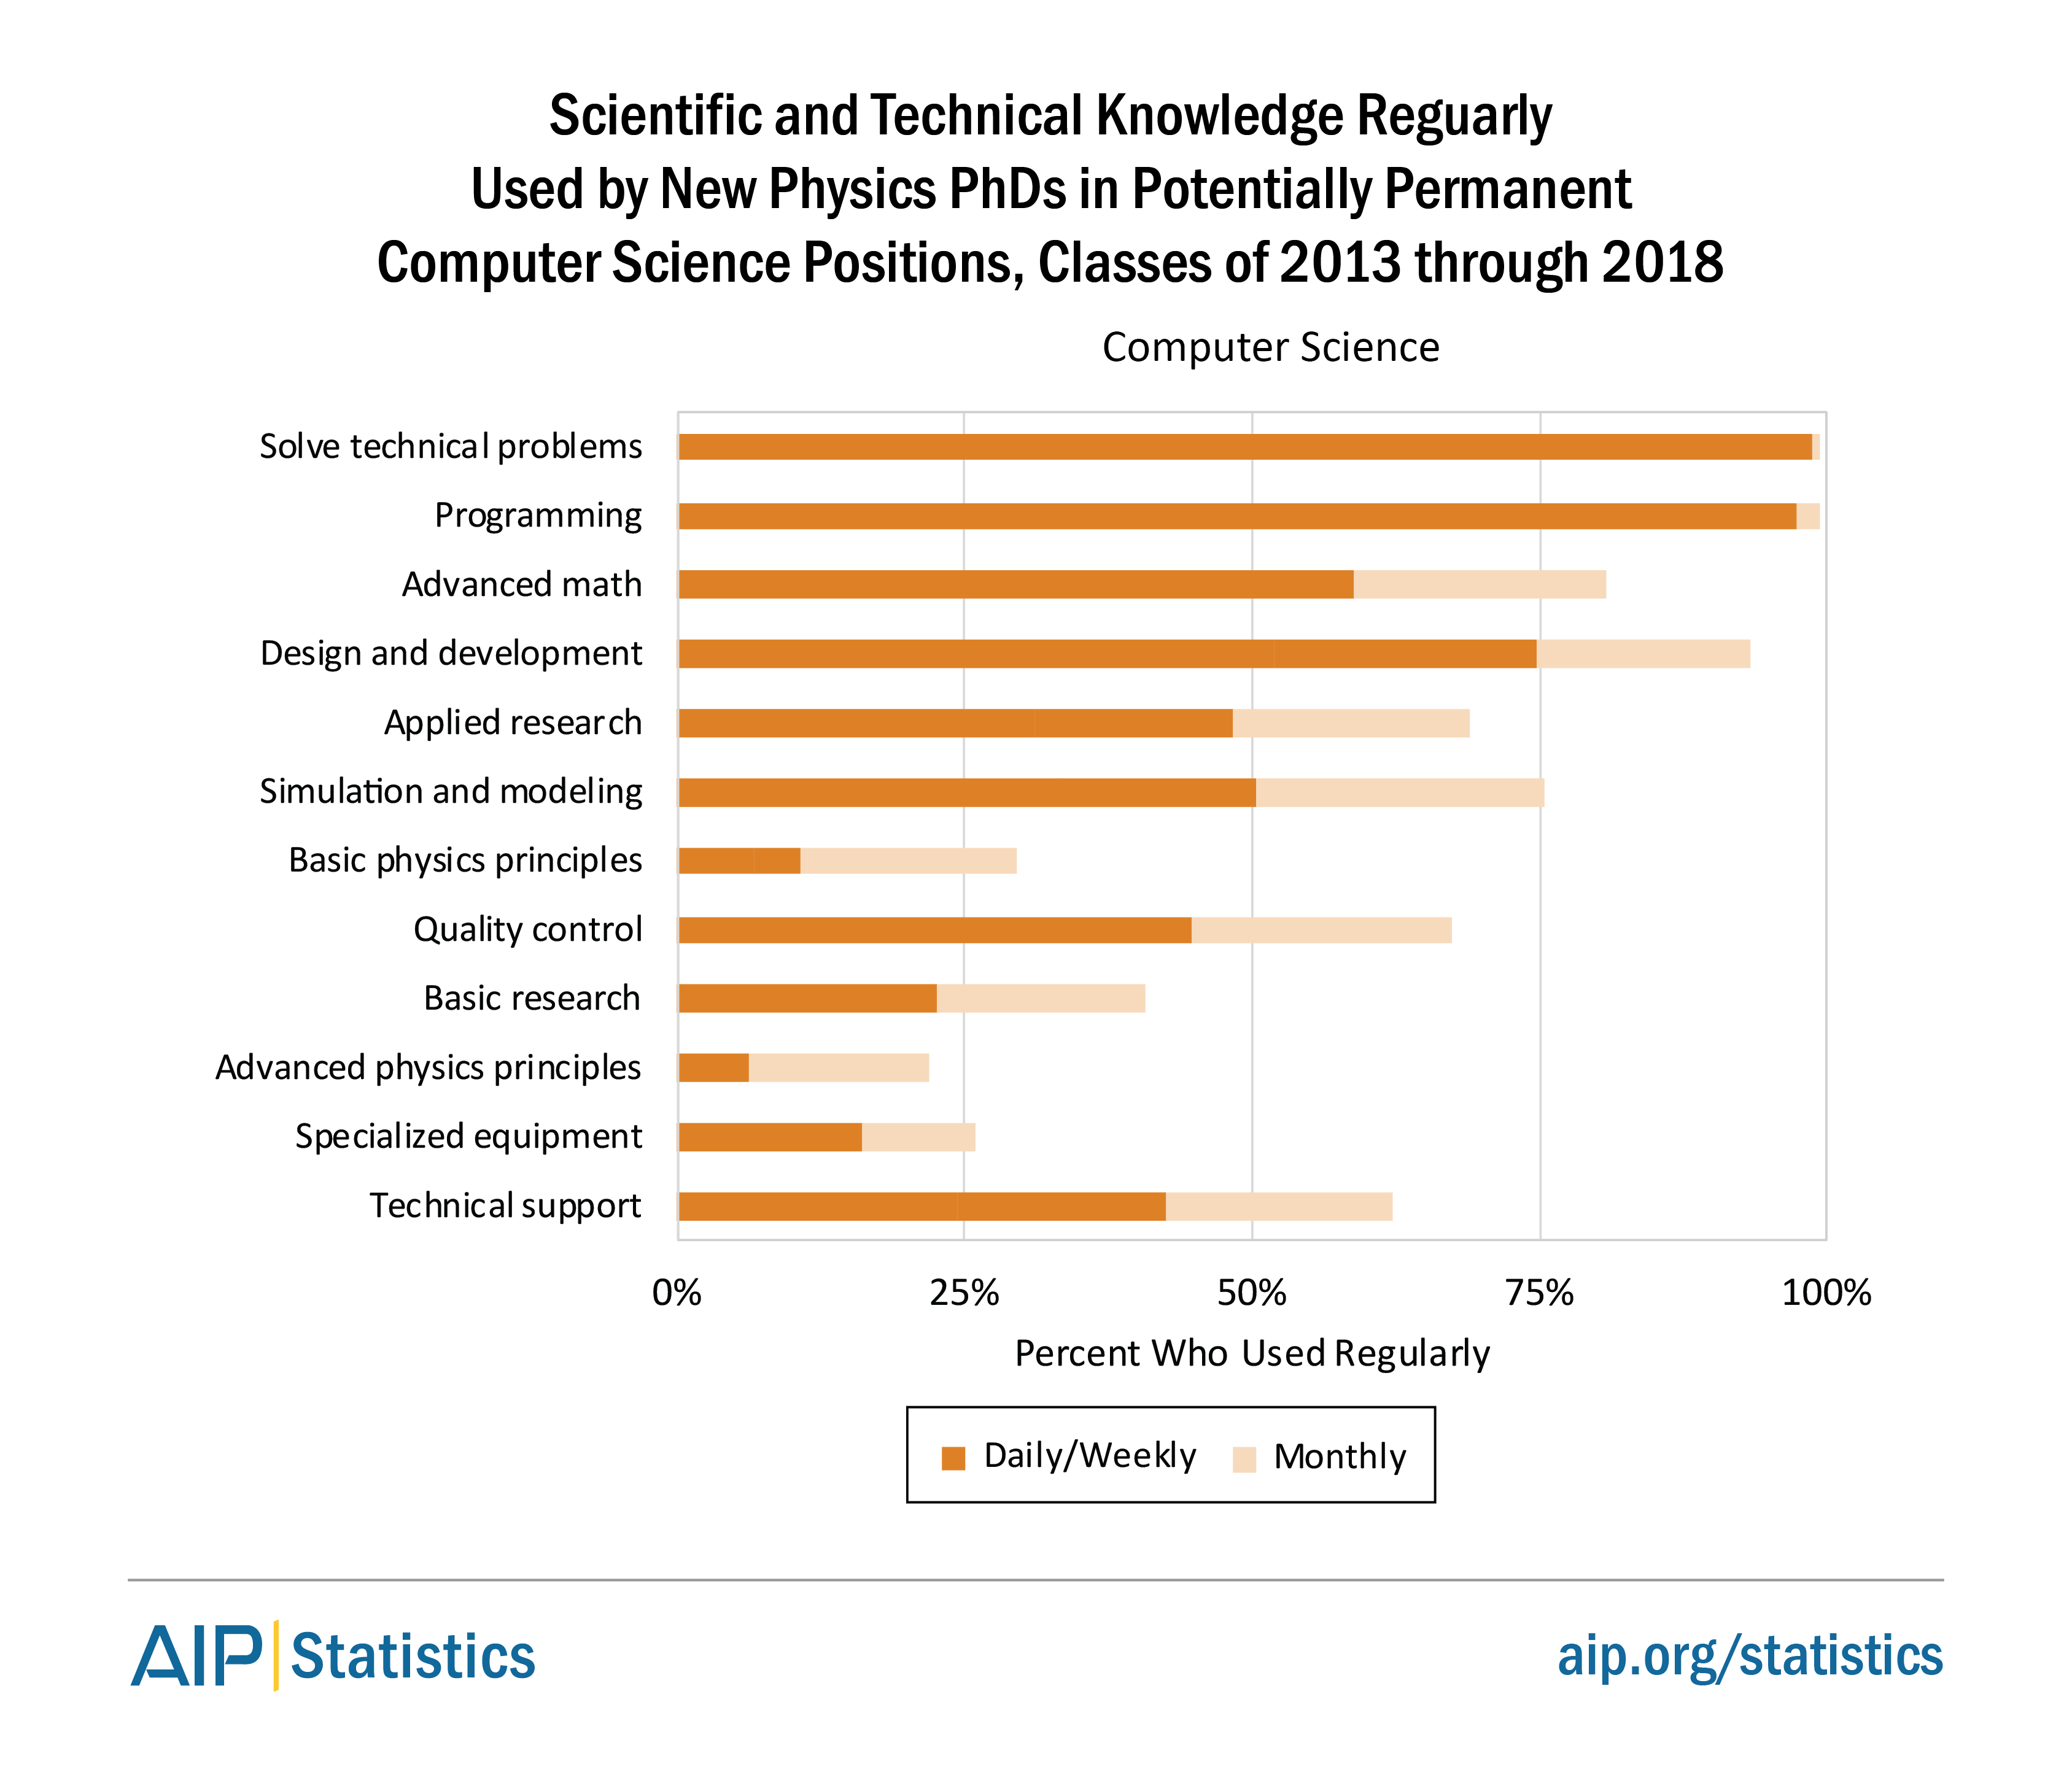 Scientific and Technical Knowledge Used by Physics PhDs in Computer Software Positions